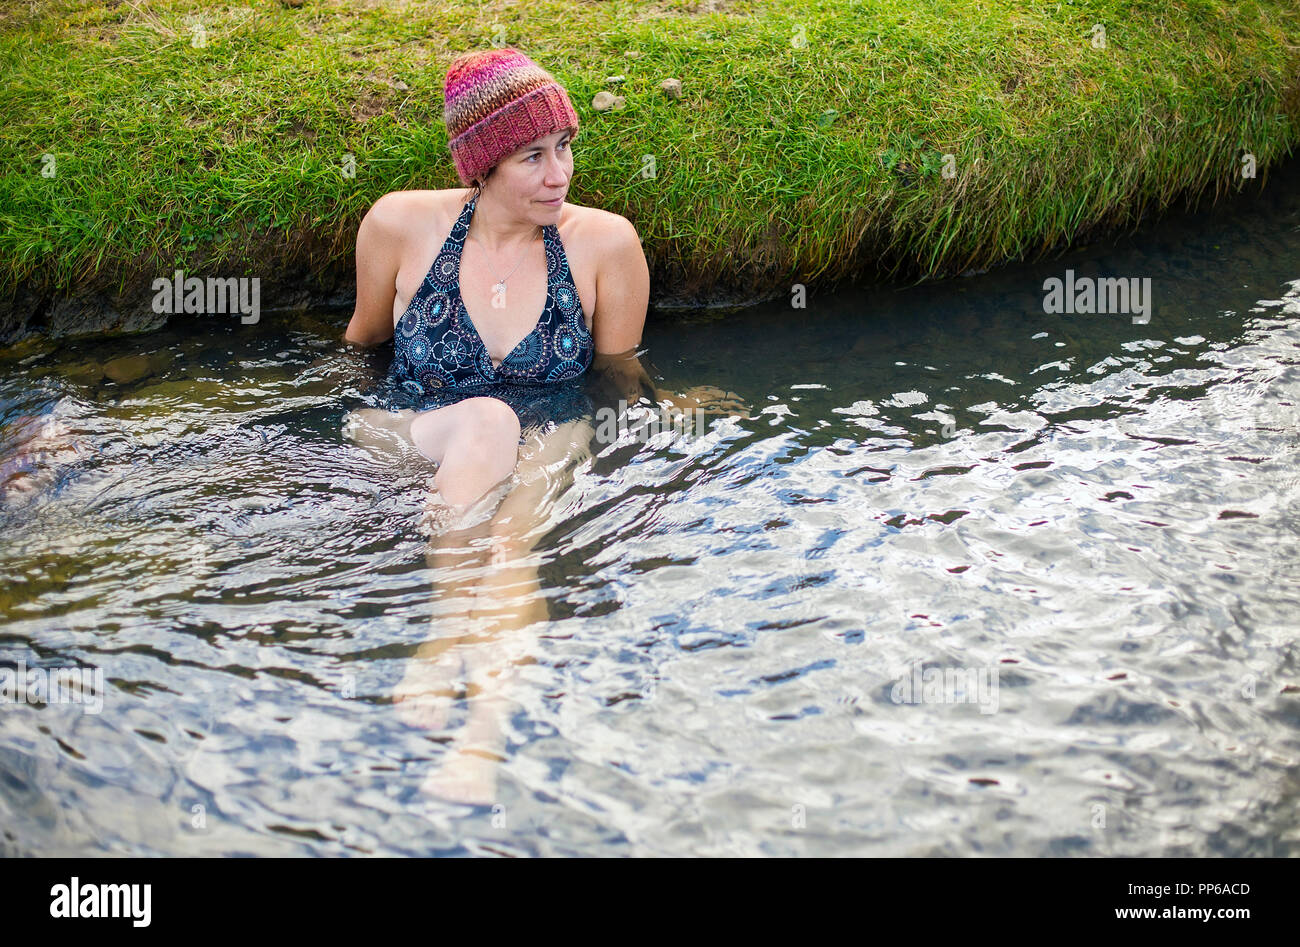 A woman wearing a colorful knit hat relaxes in a hot geothermal river in Iceland. Stock Photo